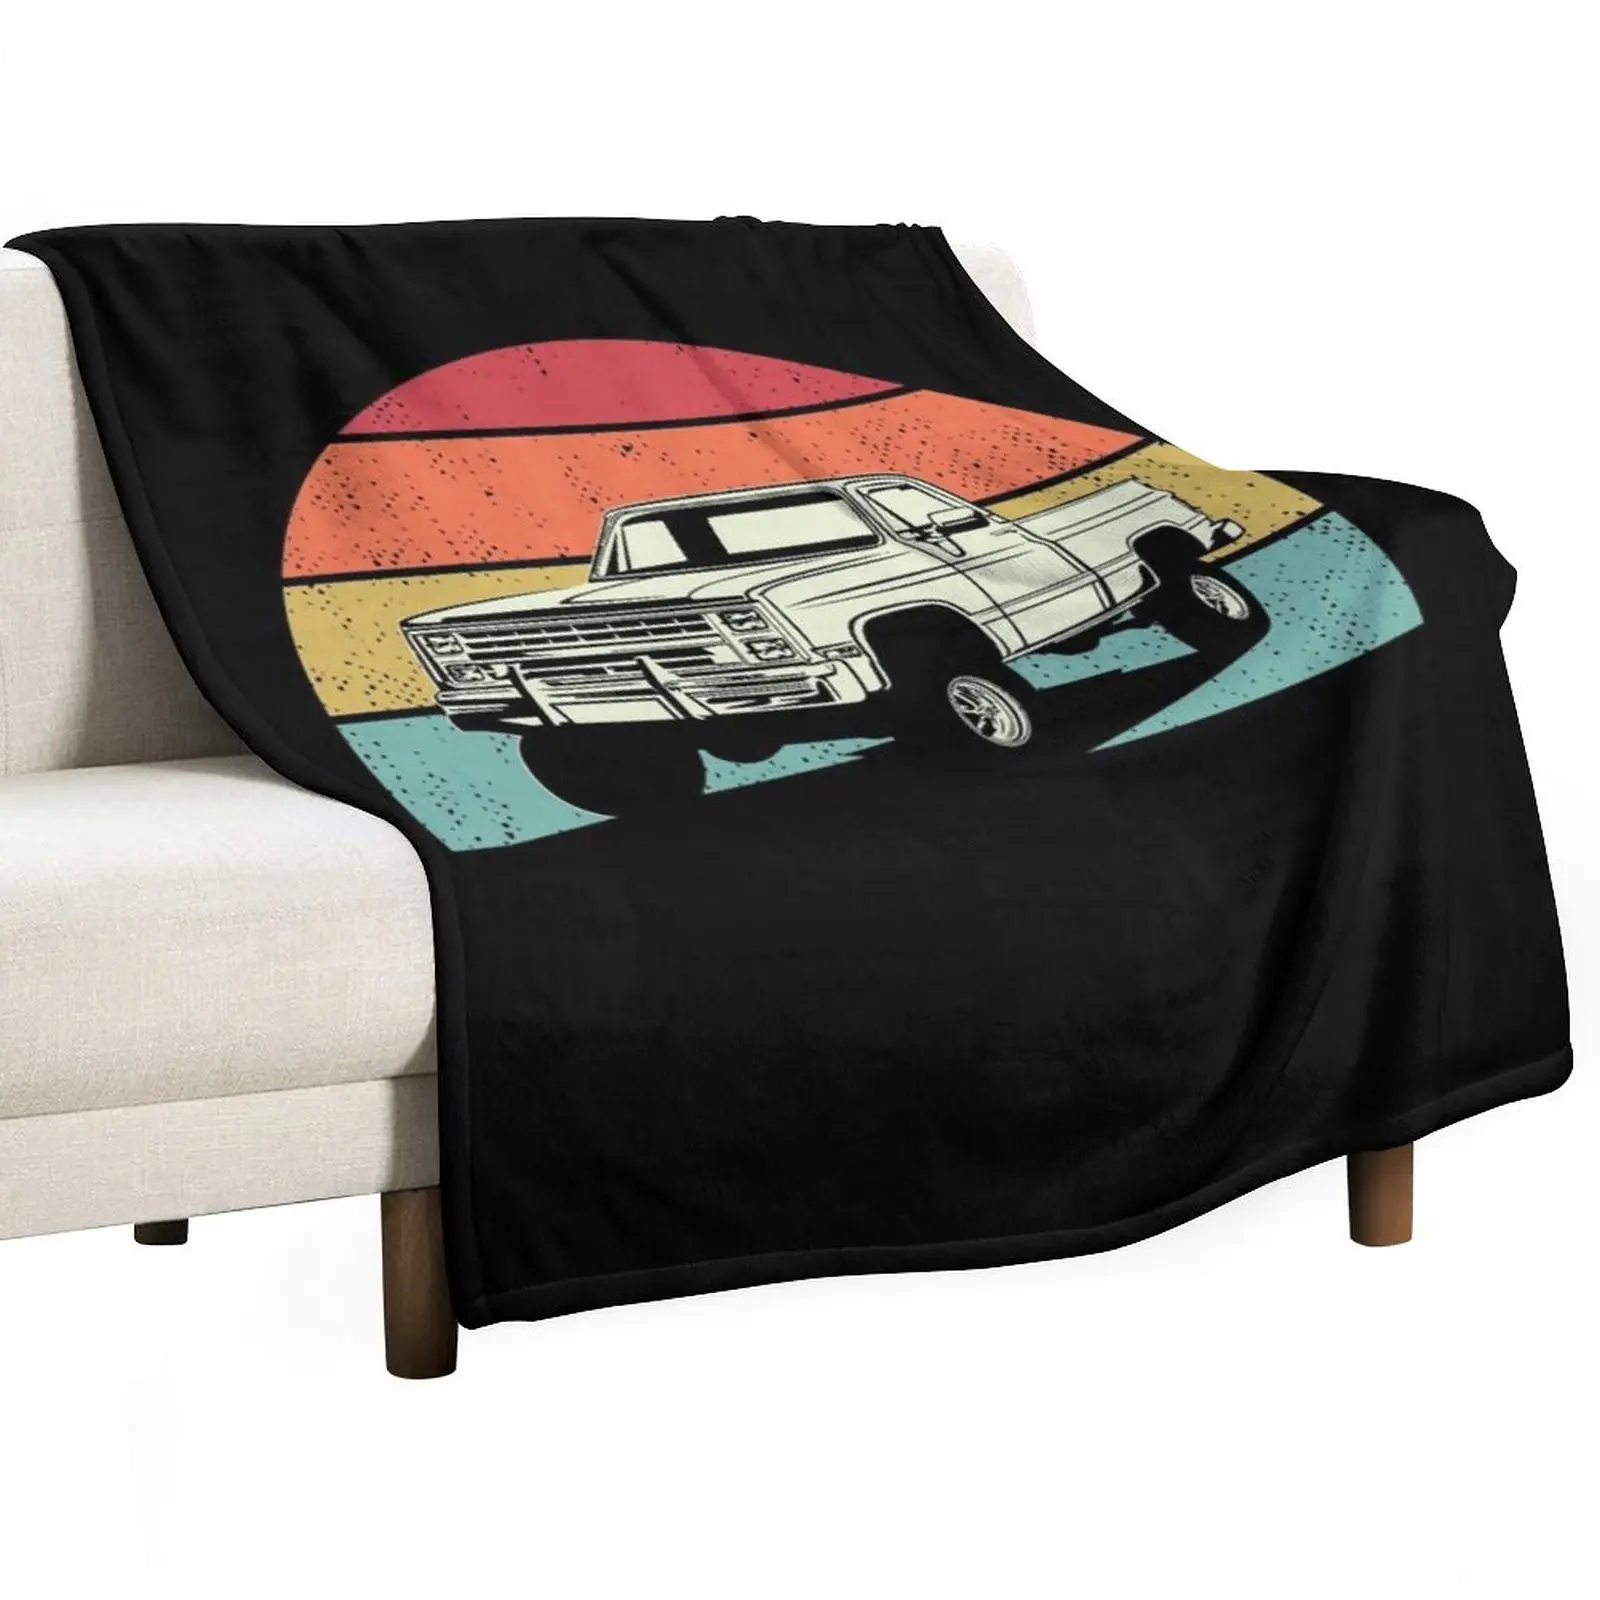 

Vintage Squarebody Truck Classic Square Body Pickup Throw Blanket Nap Blanket blankets and blankets Furry Blankets